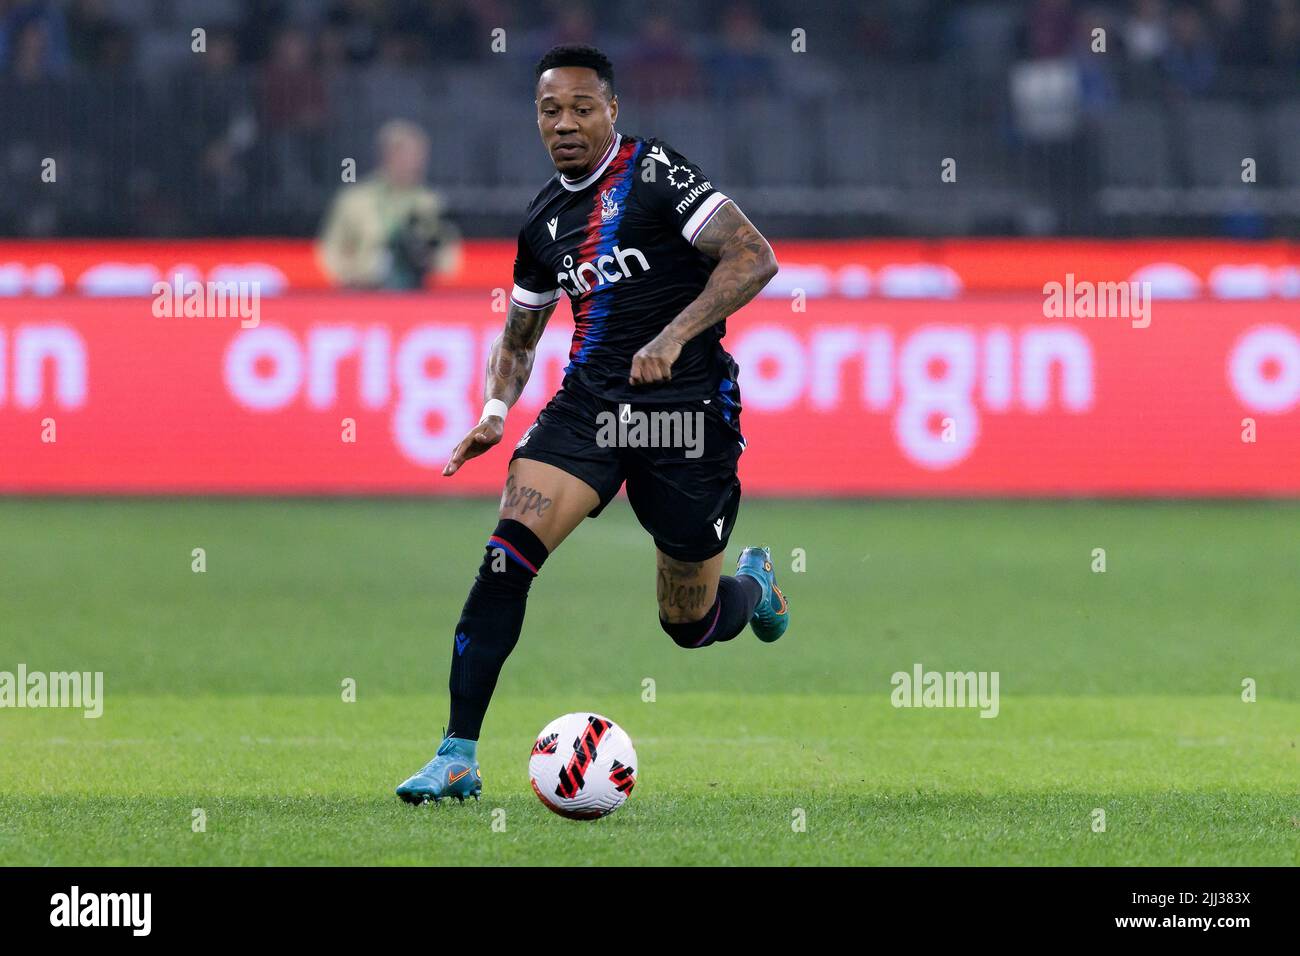 Perth, Australia, 22 July, 2022. Nathaniel Clyne of Crystal Palace controls the ball during the ICON Festival of International Football match between Crystal Palace and Leeds United at Optus Stadium on July 22, 2022 in Perth, Australia. Credit: Graham Conaty/Speed Media/Alamy Live News Stock Photo